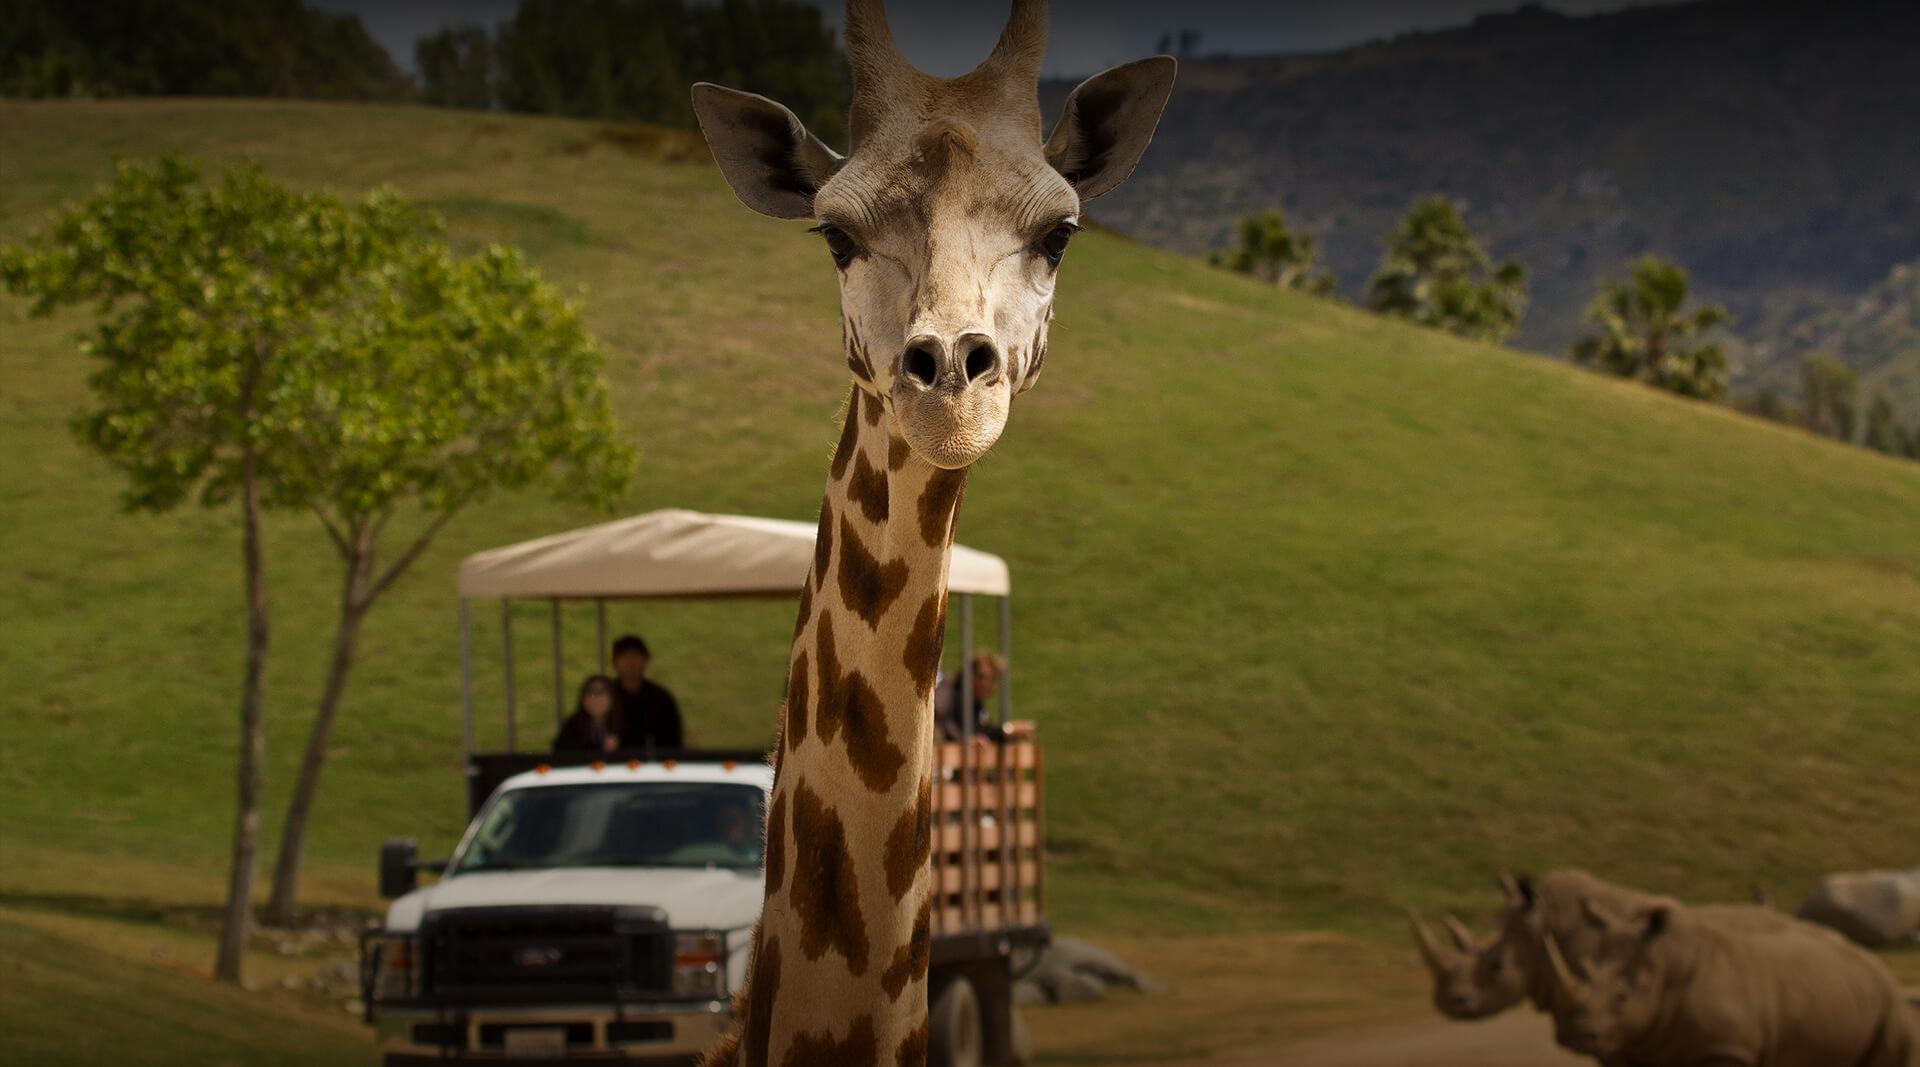 Giraffe looks at camera while rhinos and safari truck observe in the background.